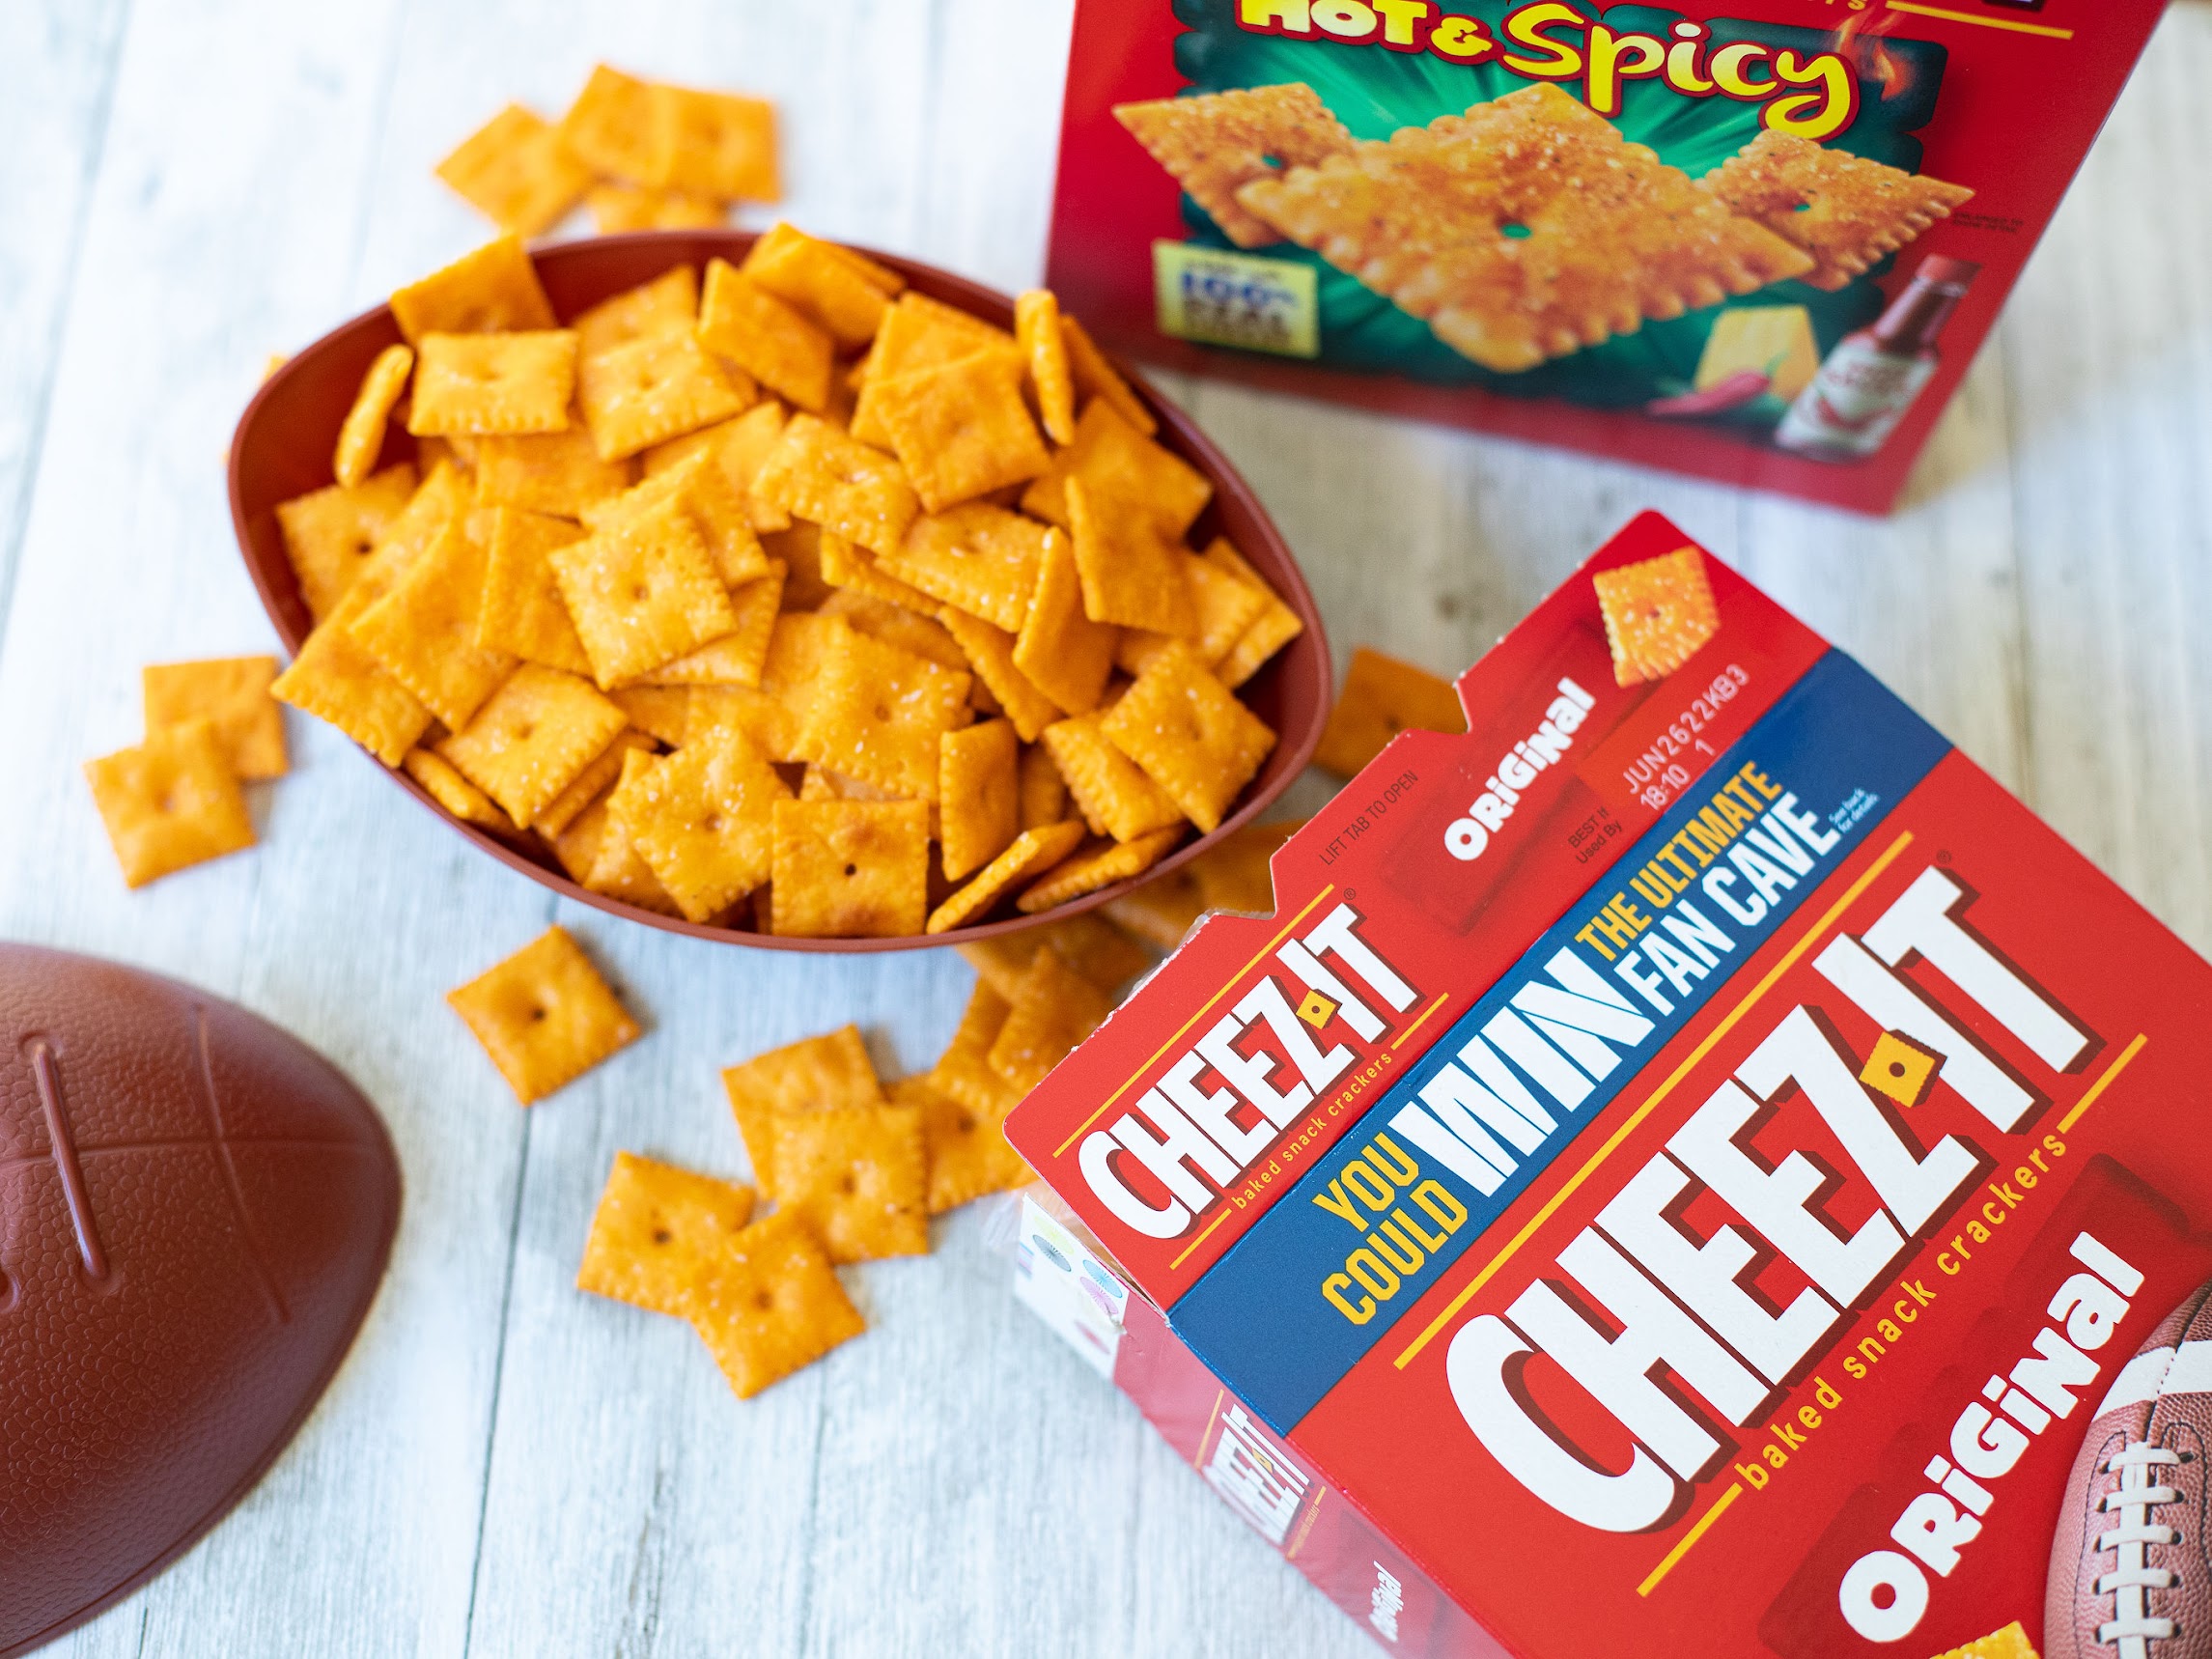 Delicious Cheez-It Snacks Are On Sale 2/$6 At Publix – Grab Those Must-Have Game Day Snacks & Save! on I Heart Publix